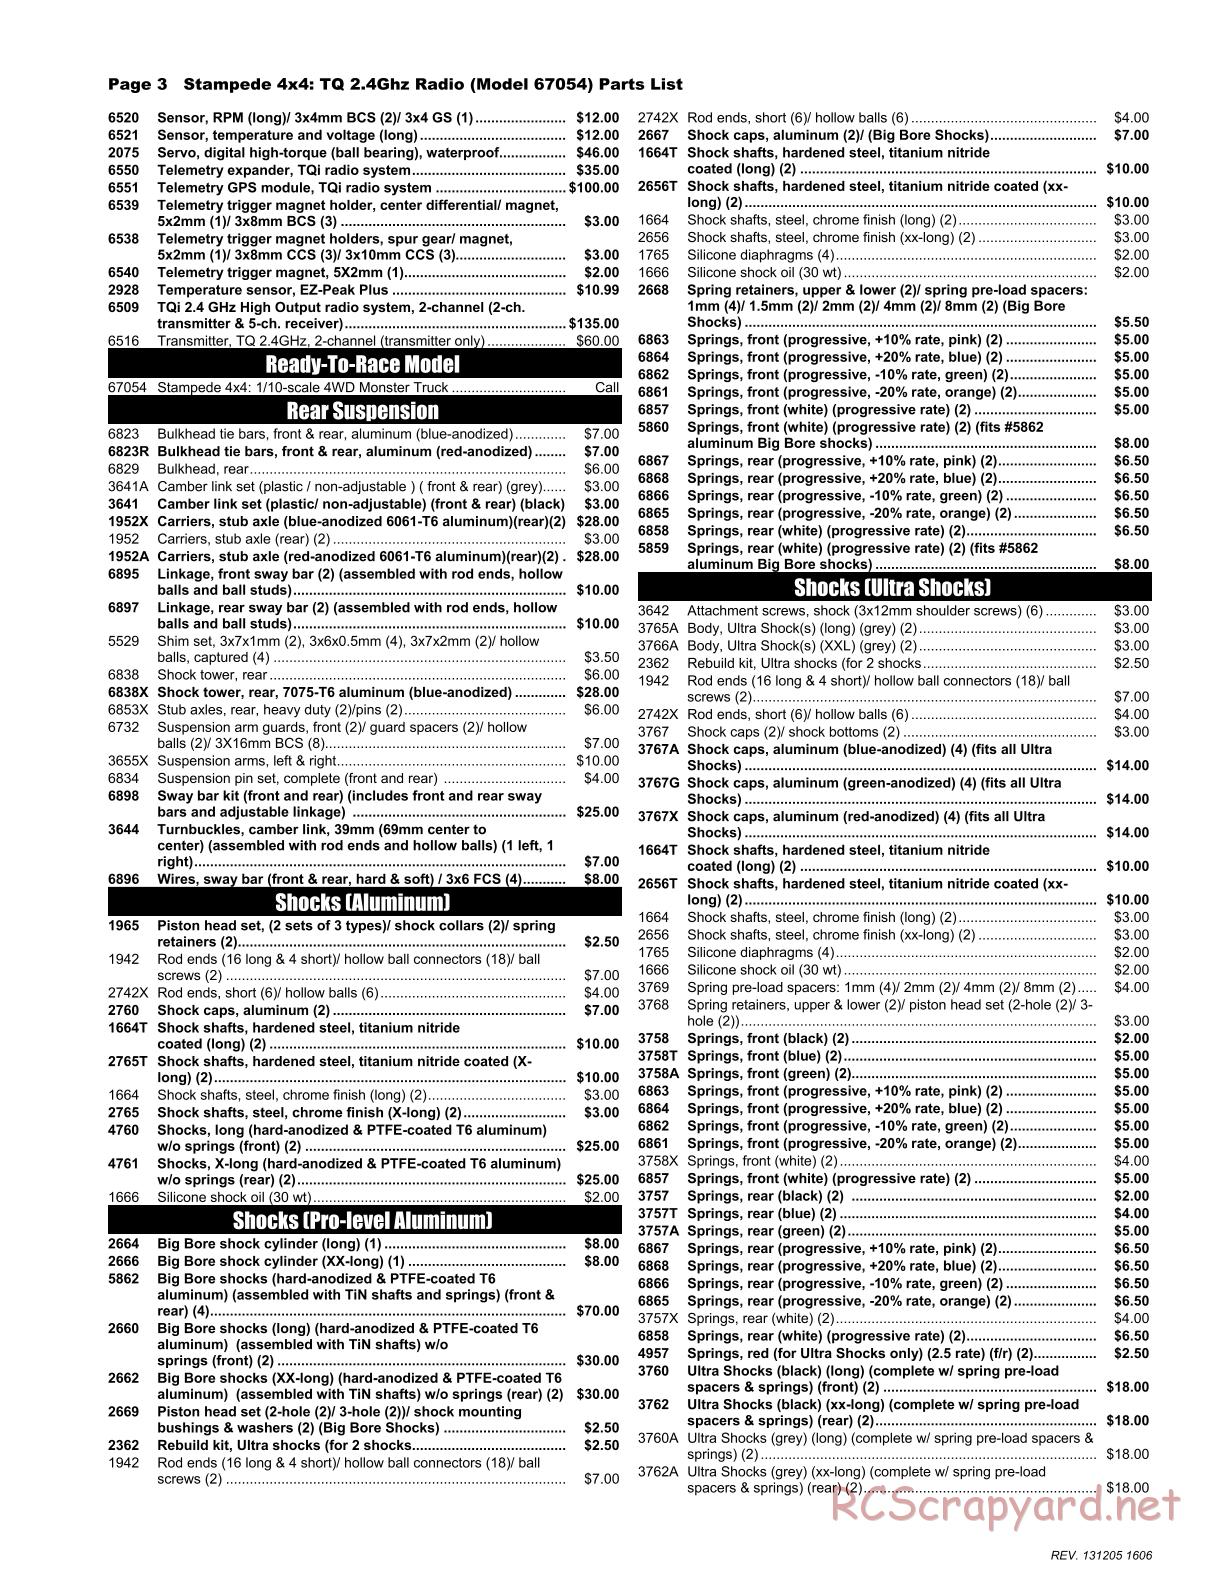 Traxxas - Stampede 4x4 (2013) - Parts List - Page 3